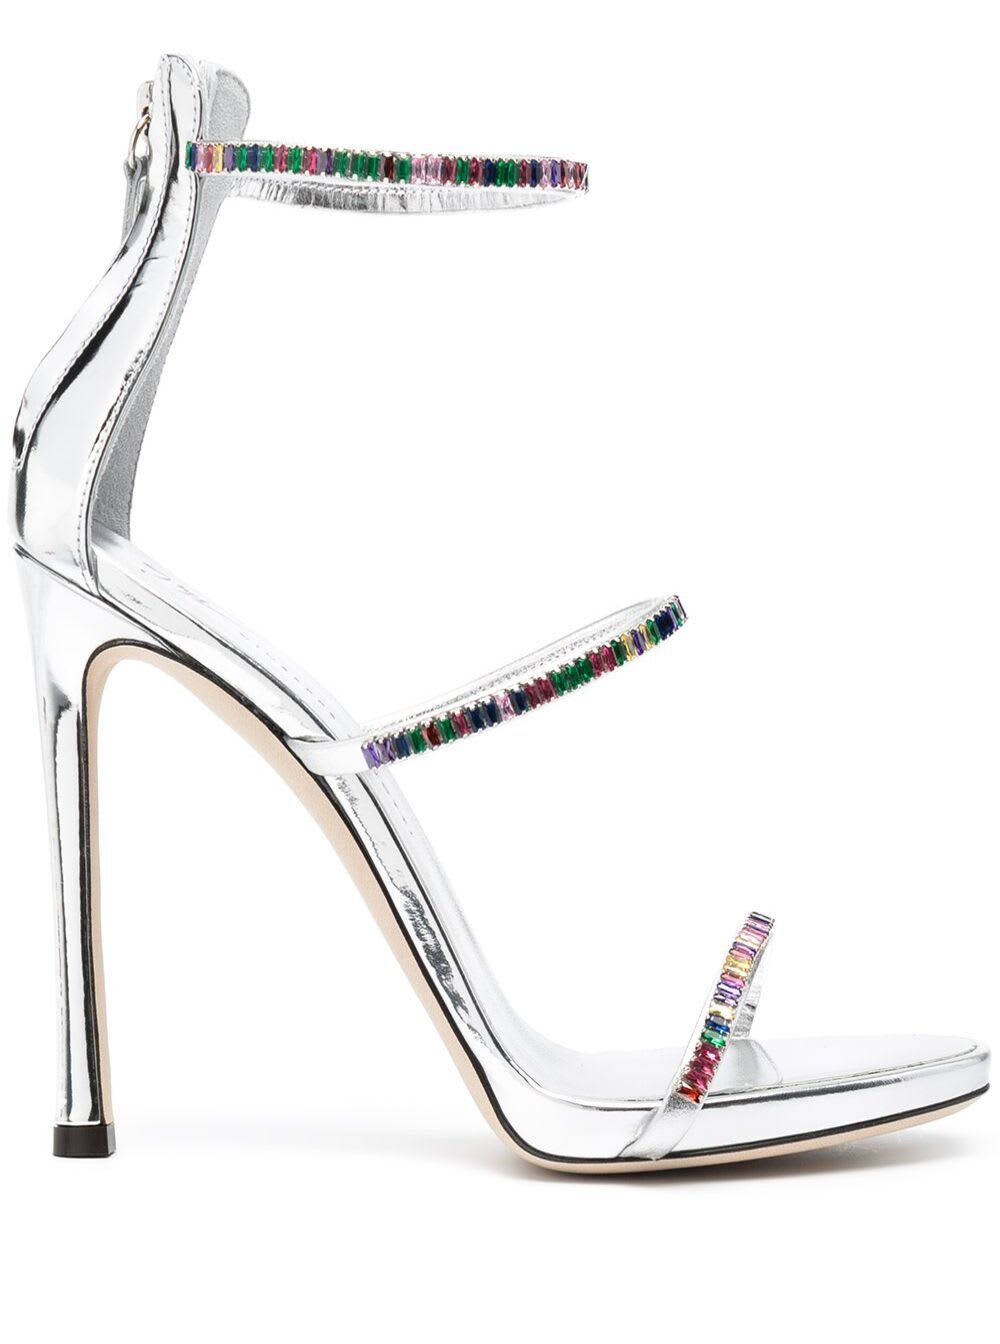 Giuseppe Zanotti Crystall Silver Colored Leather Sandals